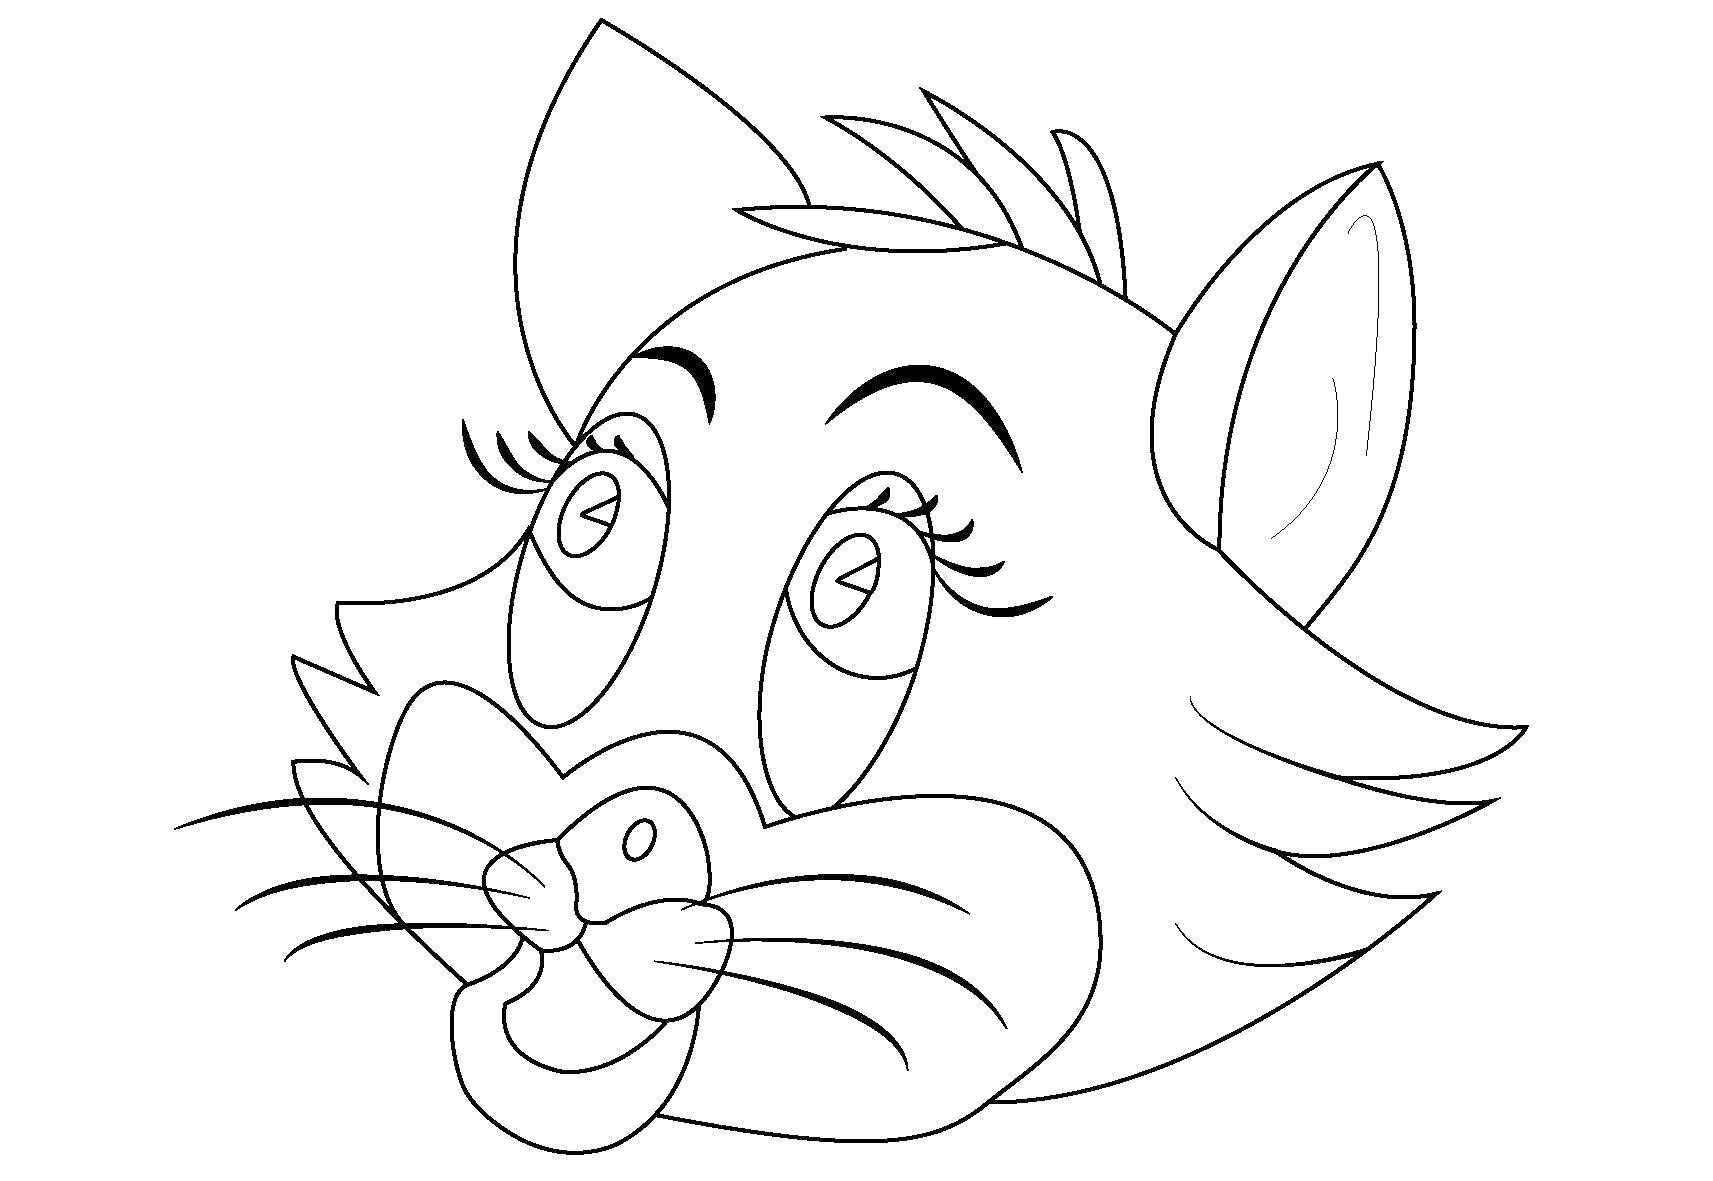 Coloring Cat. Category Masks . Tags:  The cat.